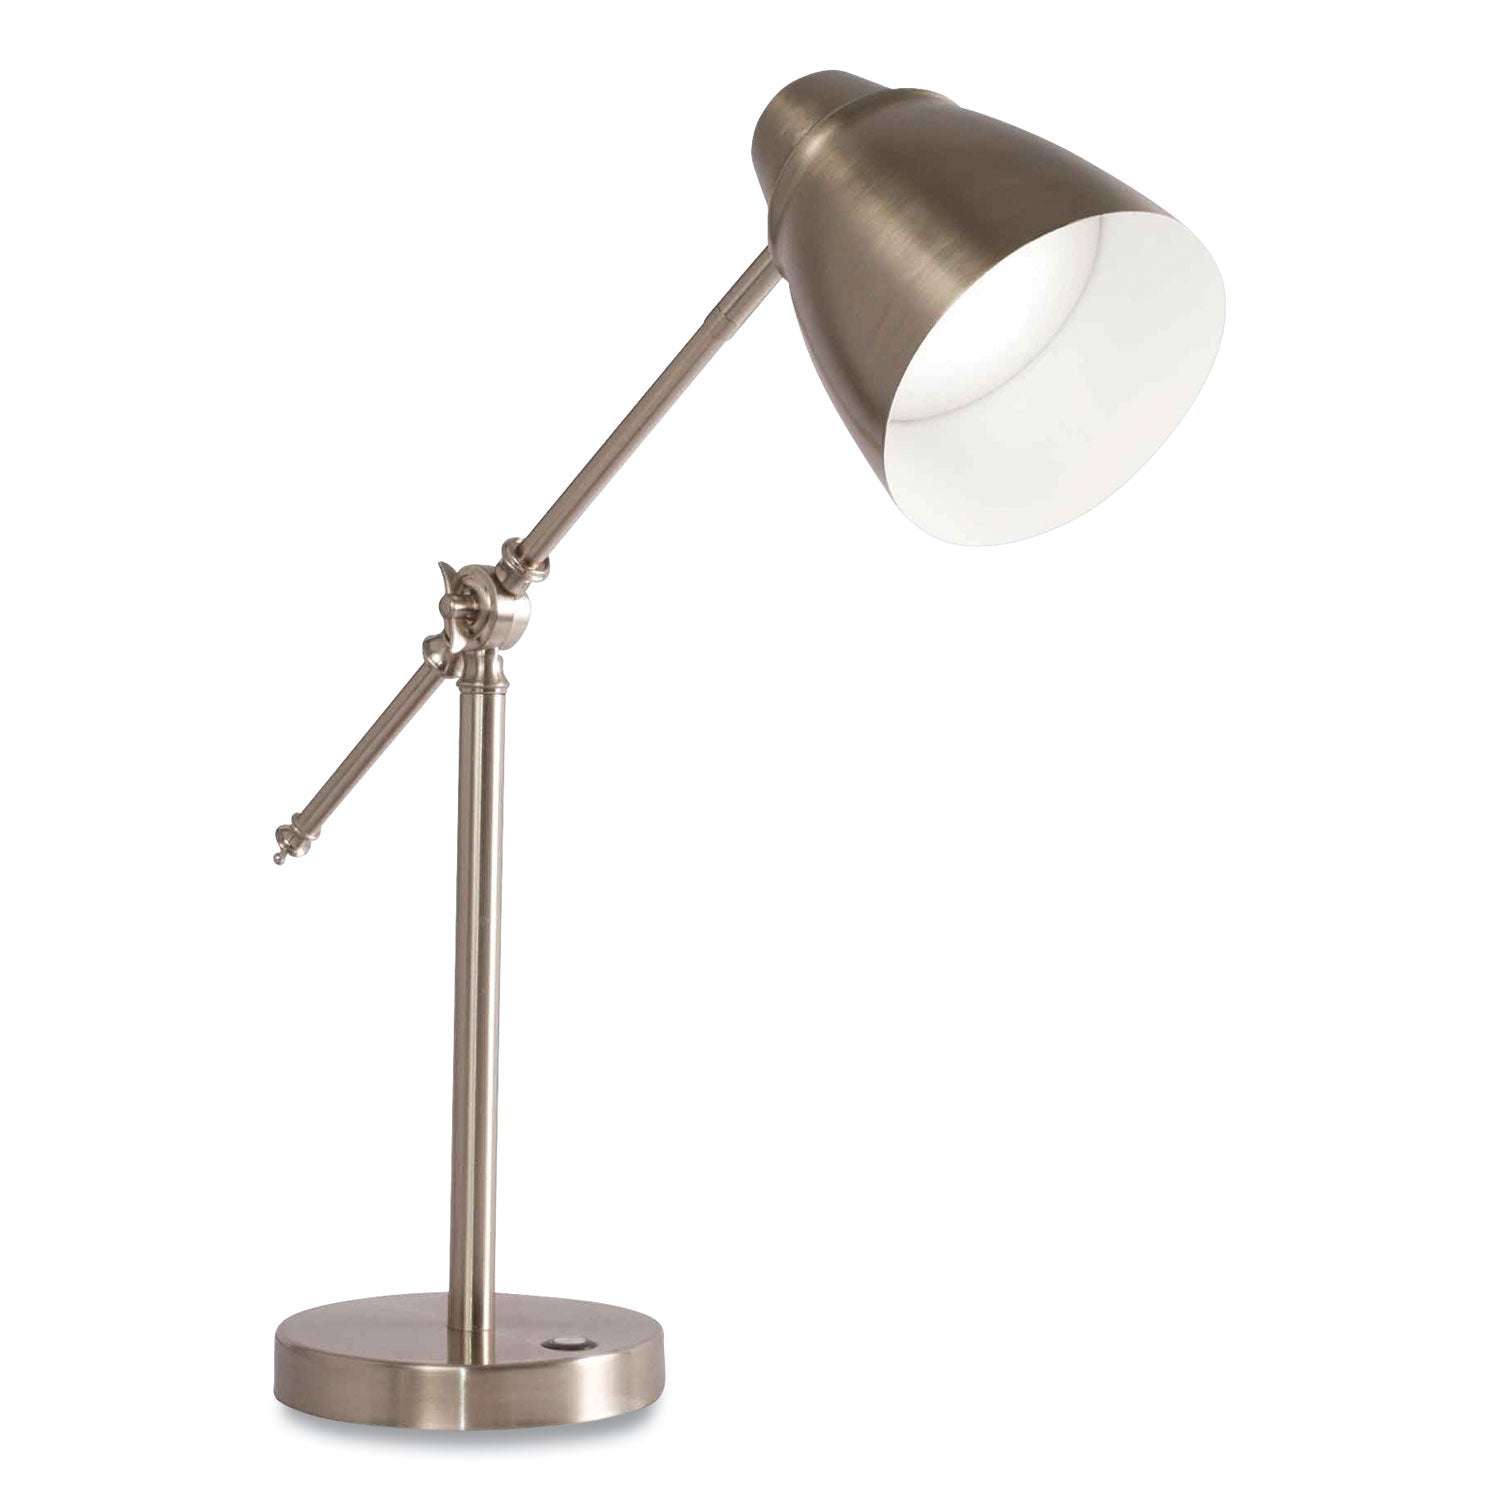 Wellness Series Harmonize LED Desk Lamp, 5" to 19" High, Silver, Ships in 4-6 Business Days - 1